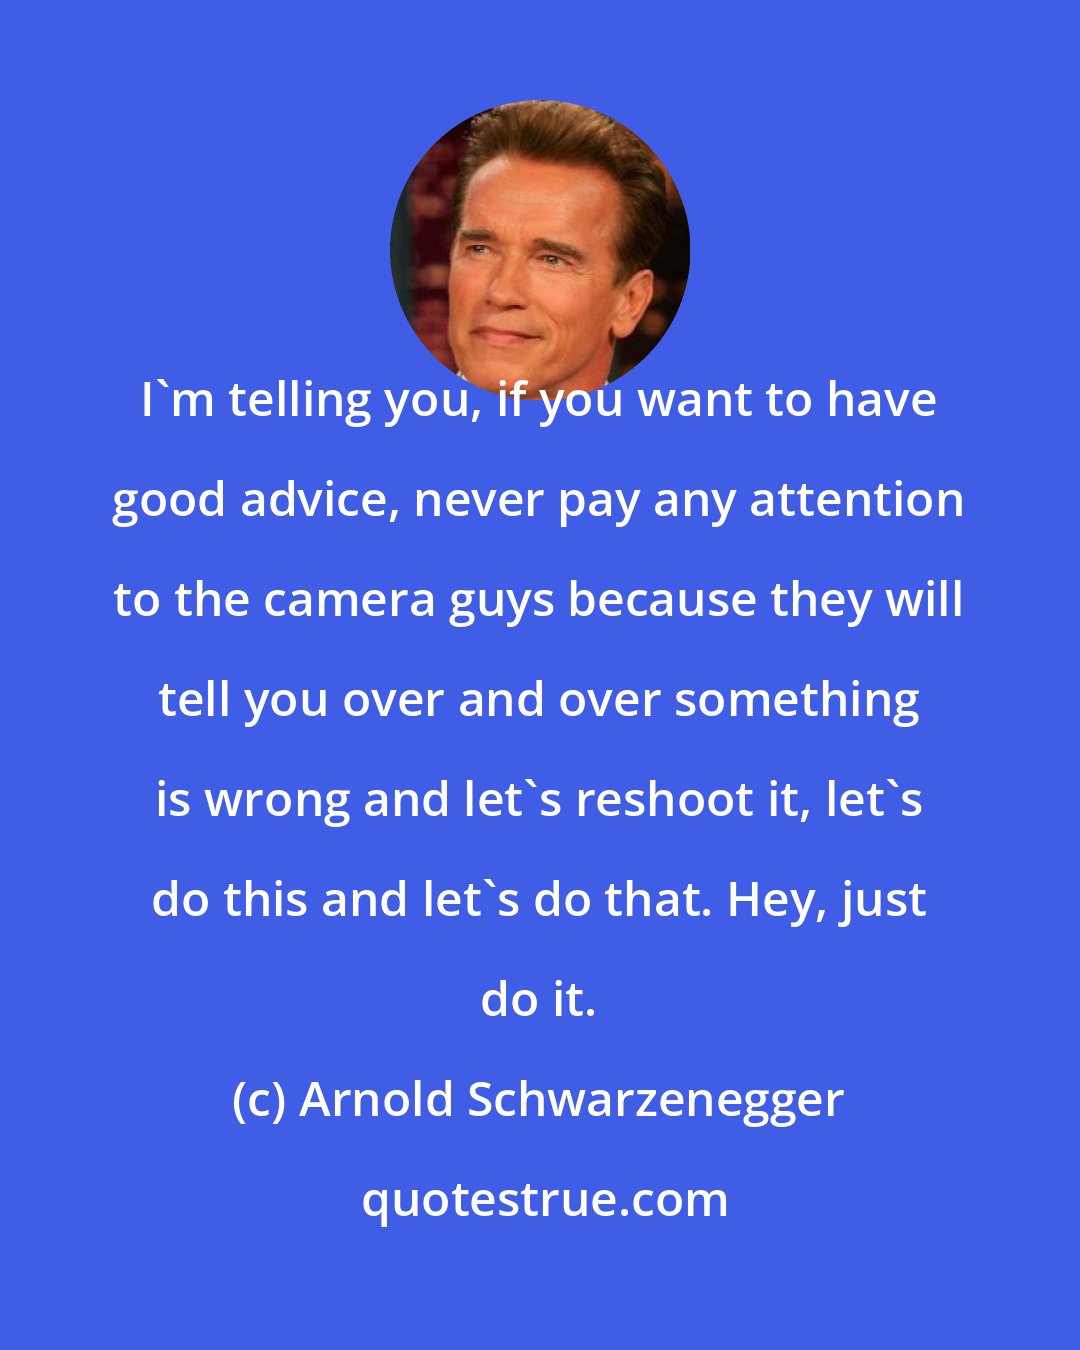 Arnold Schwarzenegger: I'm telling you, if you want to have good advice, never pay any attention to the camera guys because they will tell you over and over something is wrong and let's reshoot it, let's do this and let's do that. Hey, just do it.